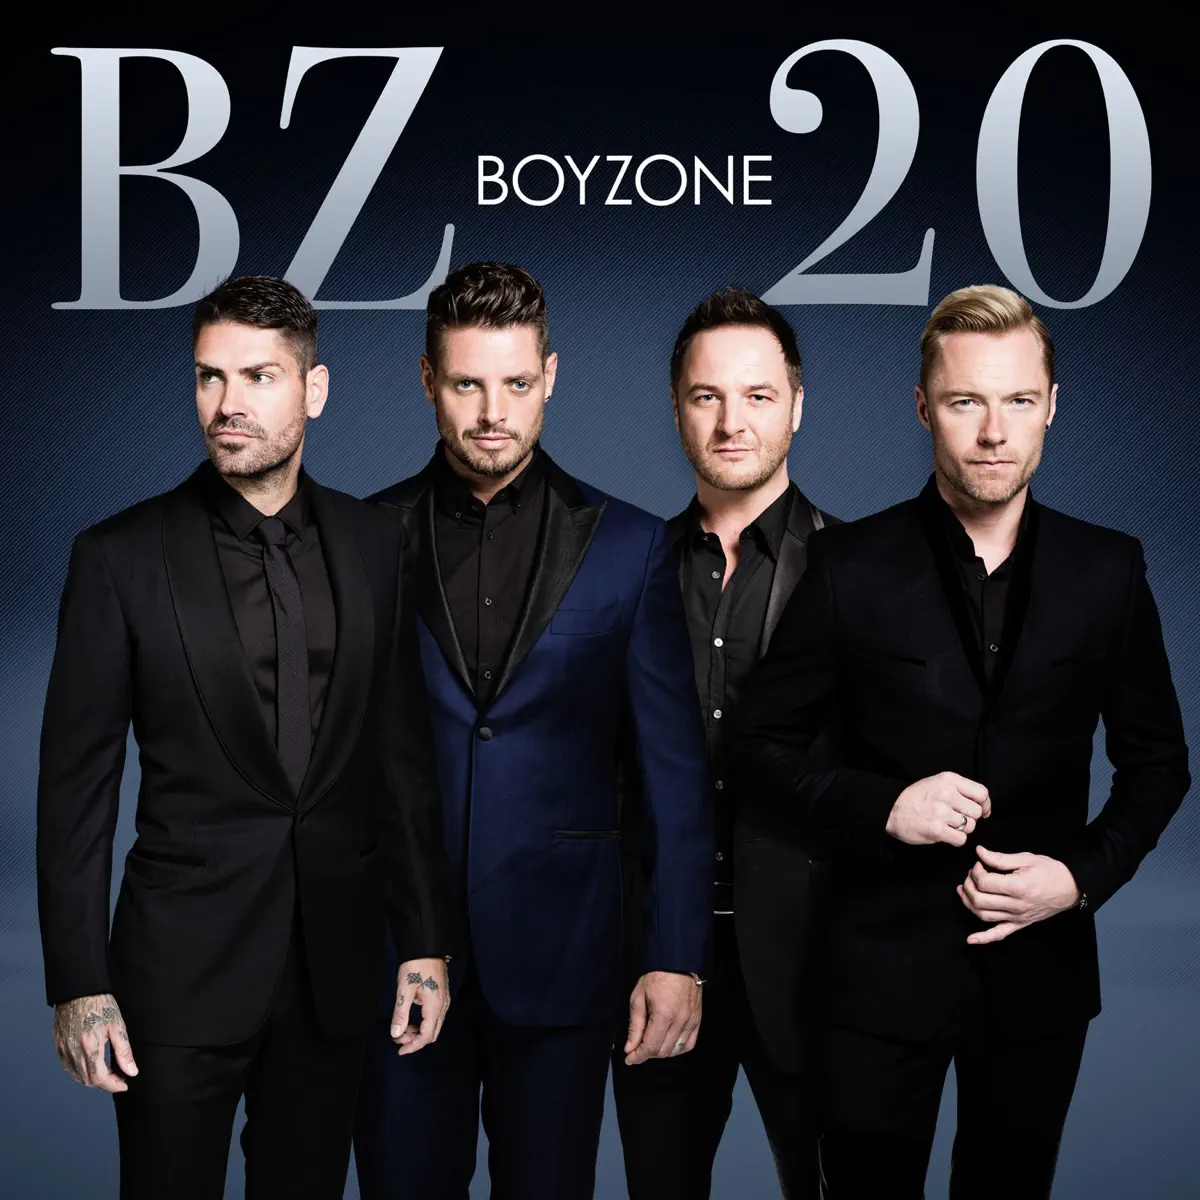 Boyzone - BZ20 (Deluxe Edition) (2013) [iTunes Plus AAC M4A]-新房子